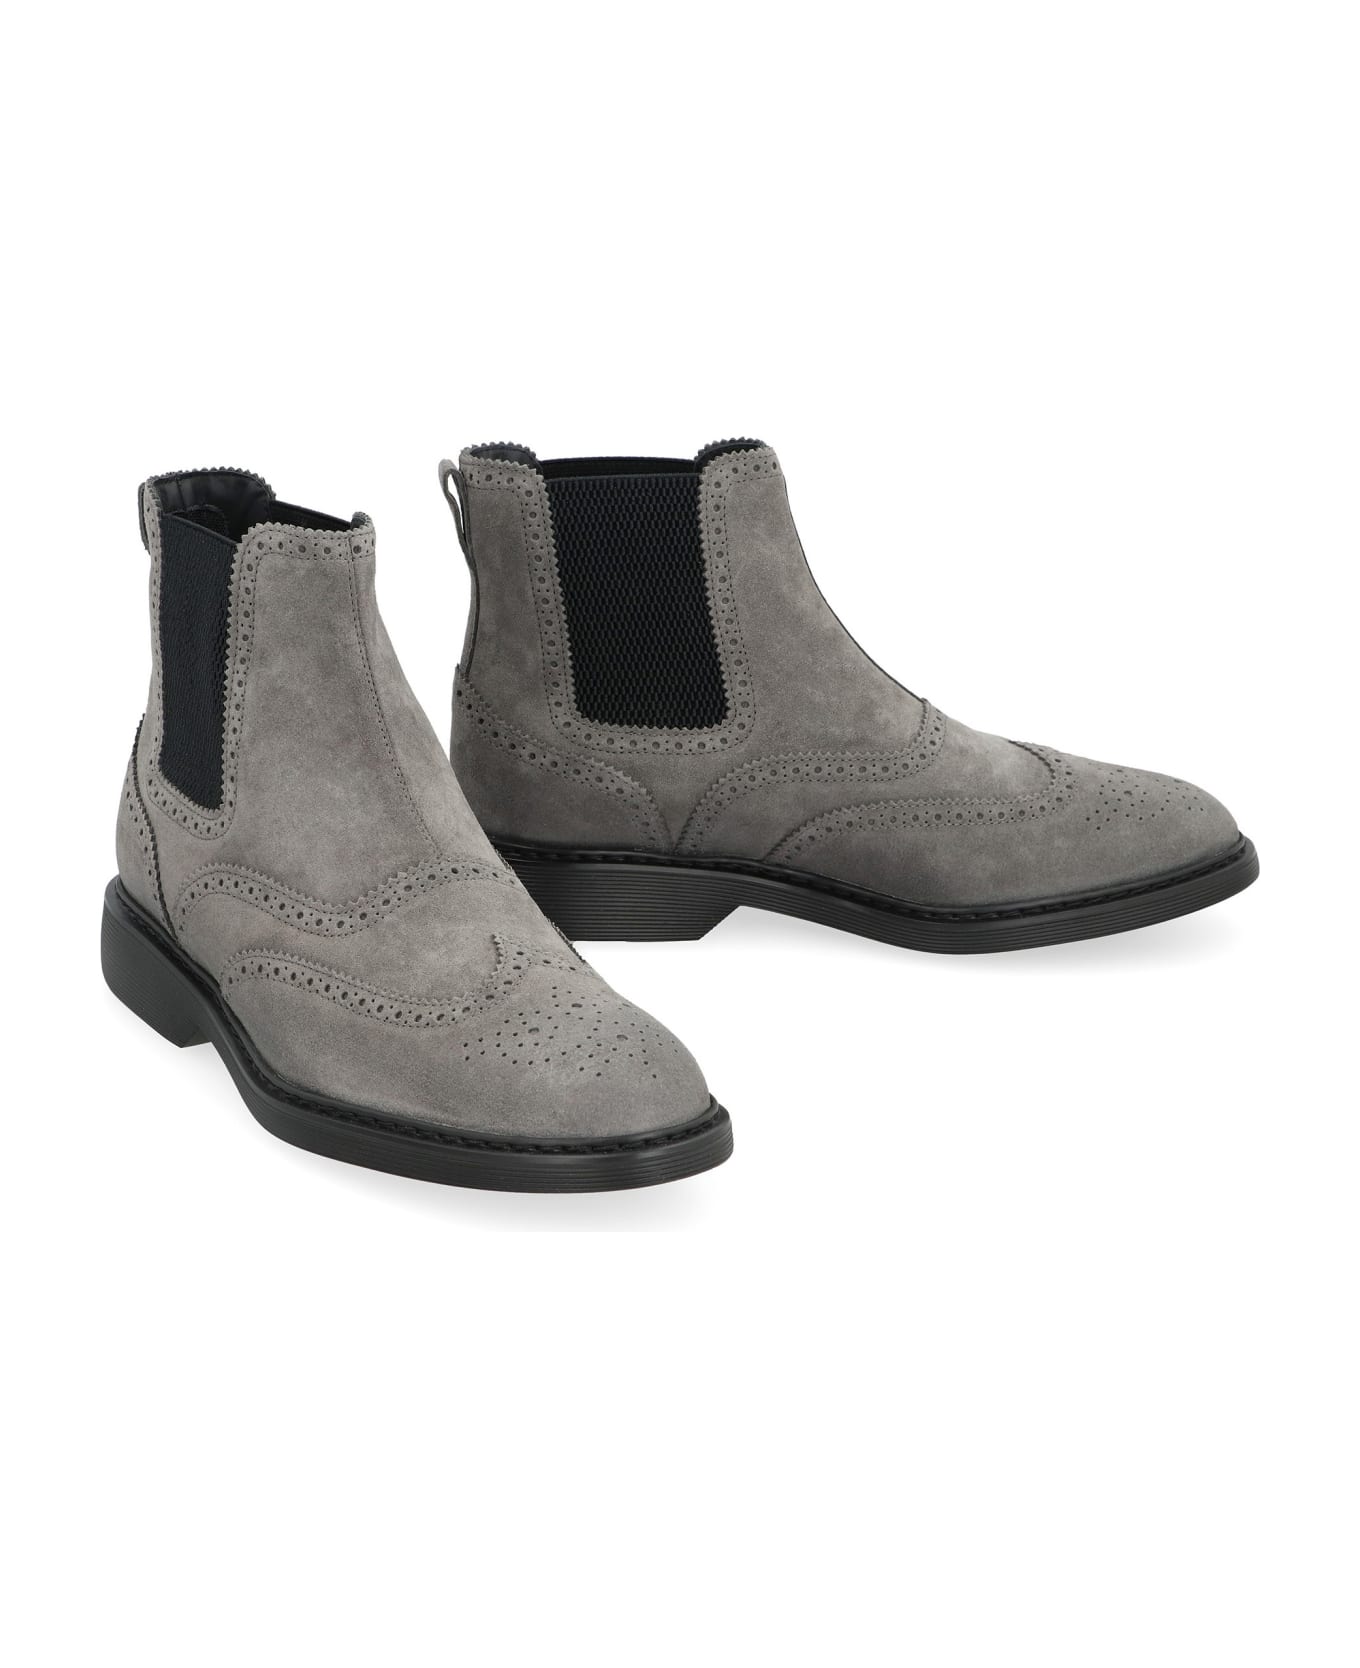 Hogan Leather Ankle Boot - grey ブーツ